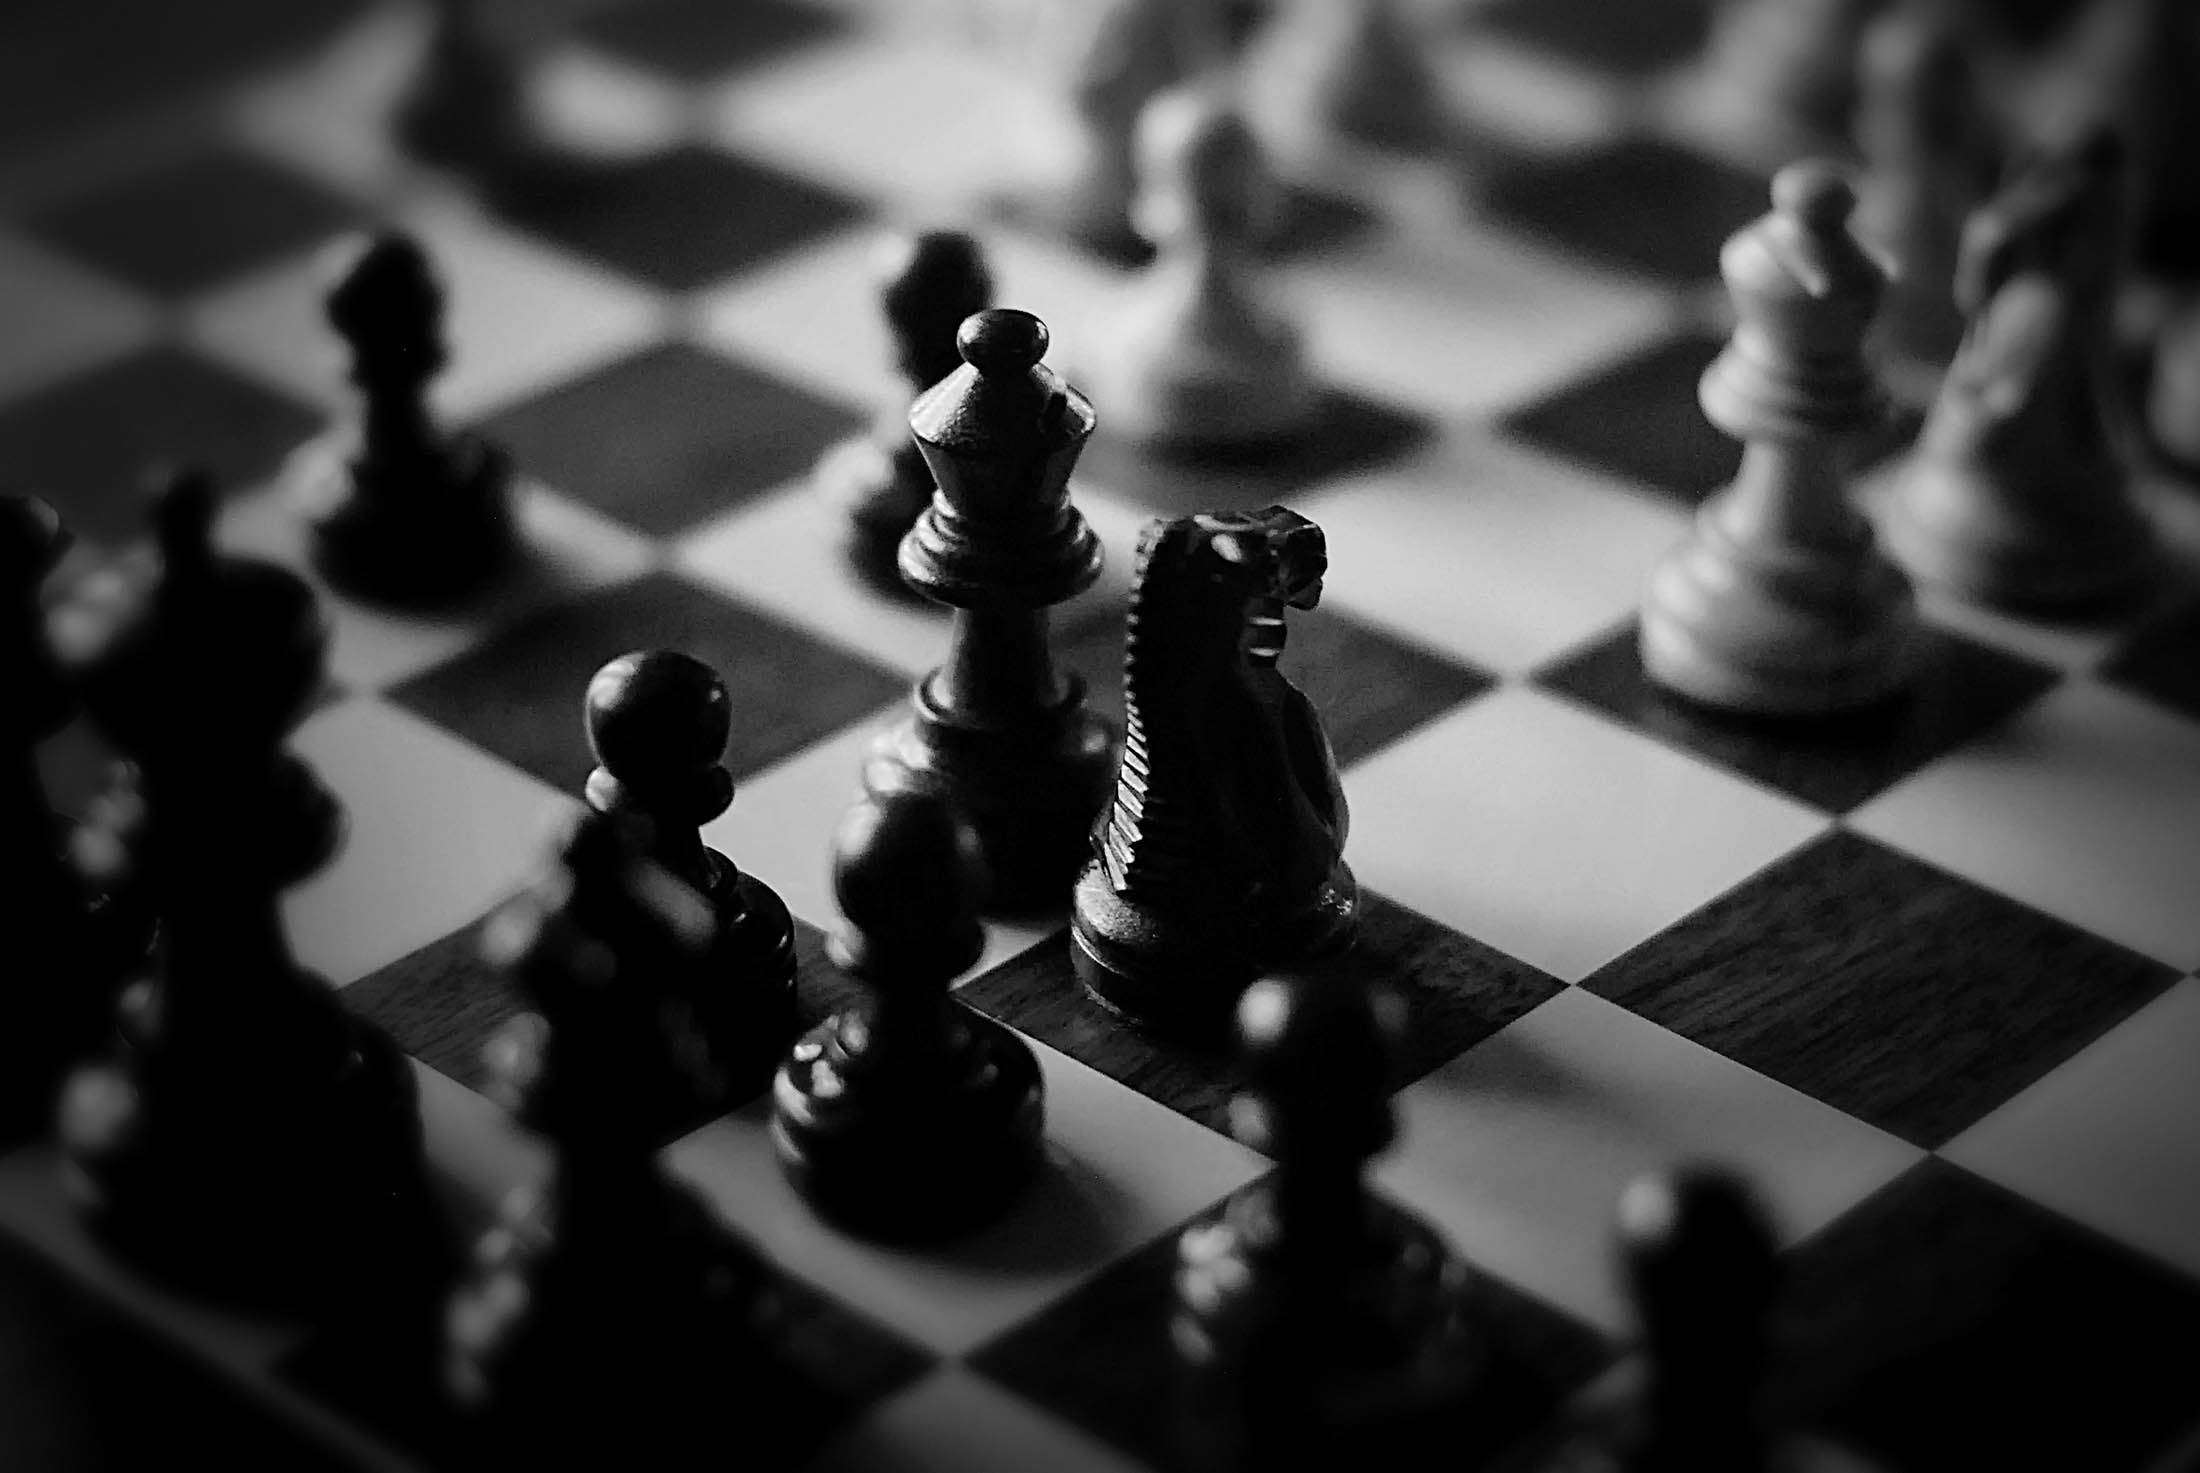 Game of chess in black and white
